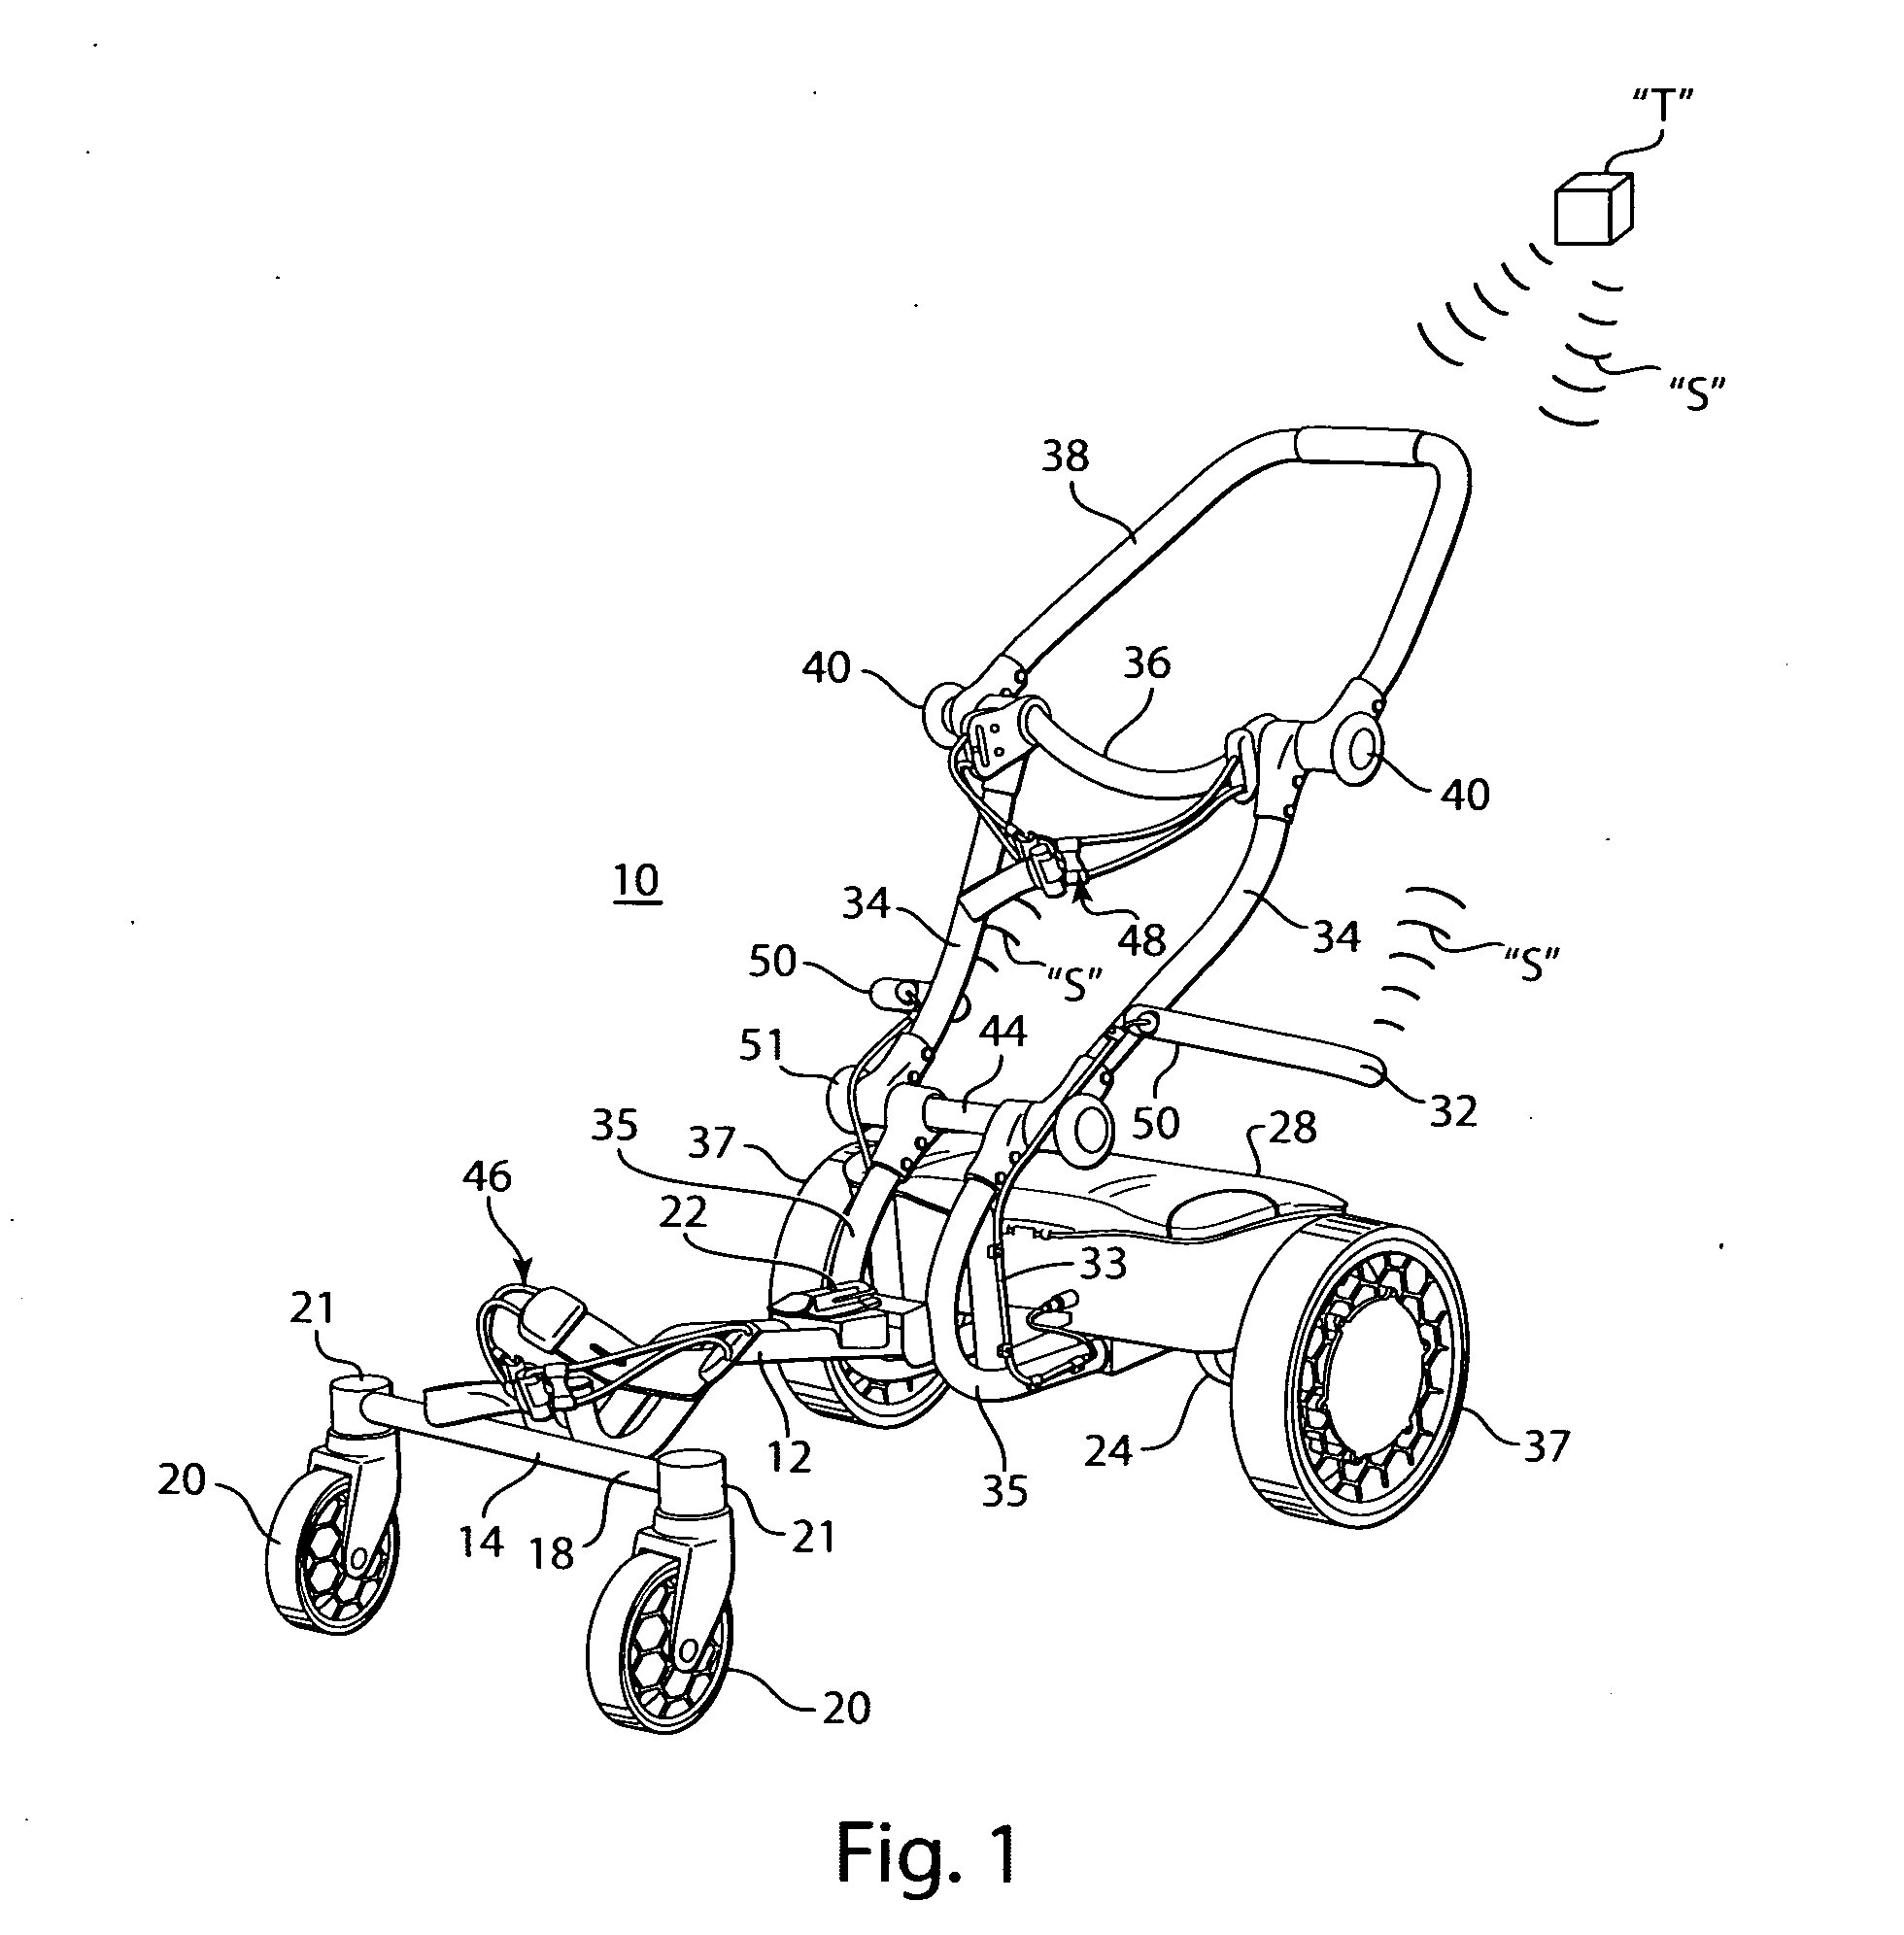 Foldable cart with tracking arrangement